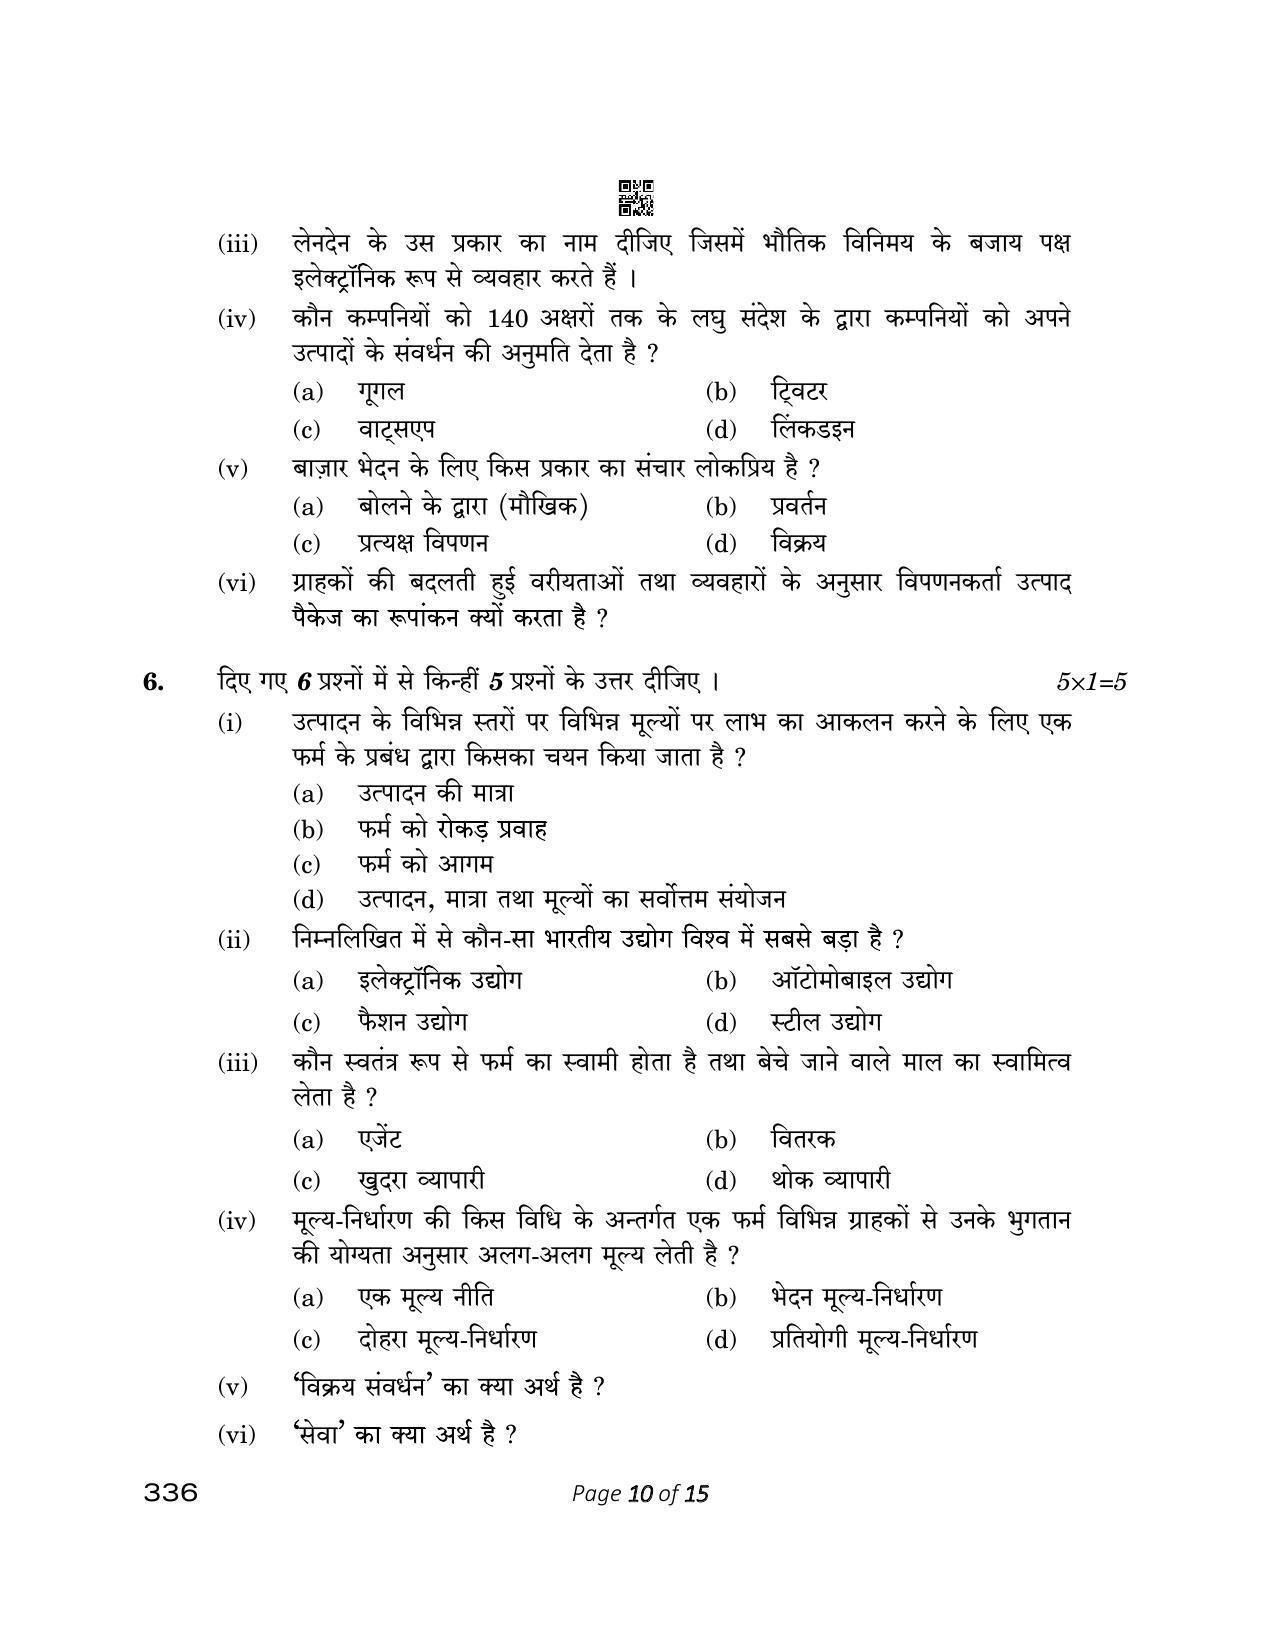 CBSE Class 12 336_ Marketing 2023 Question Paper - Page 10